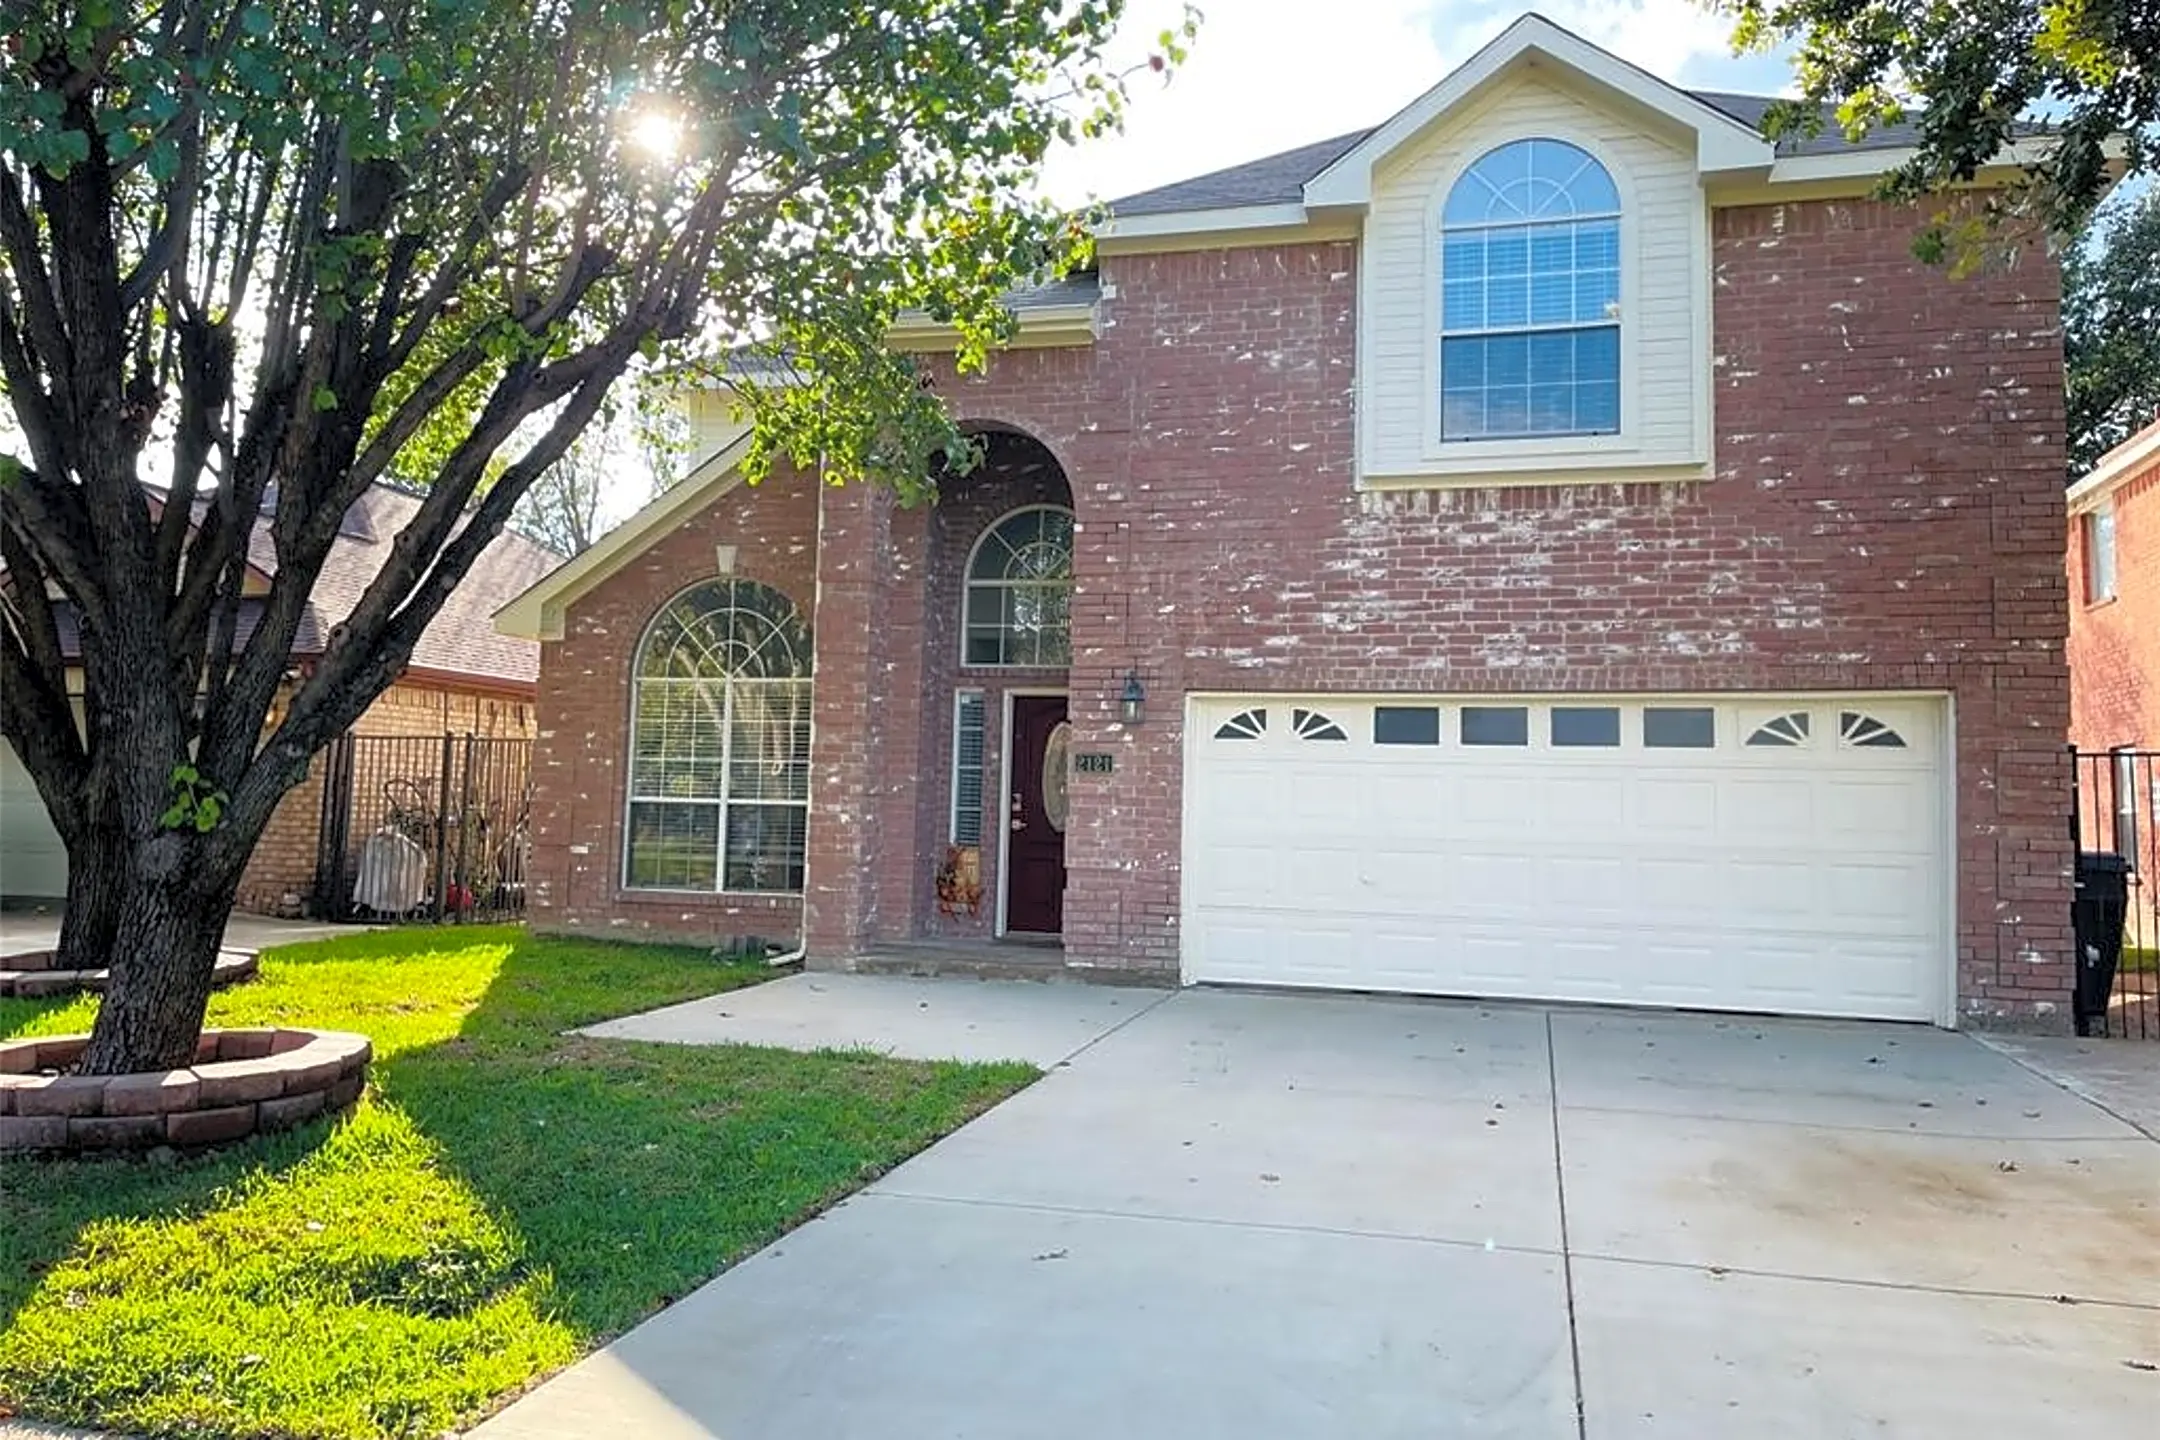 Building - 2121 Bay View Dr - Irving, TX